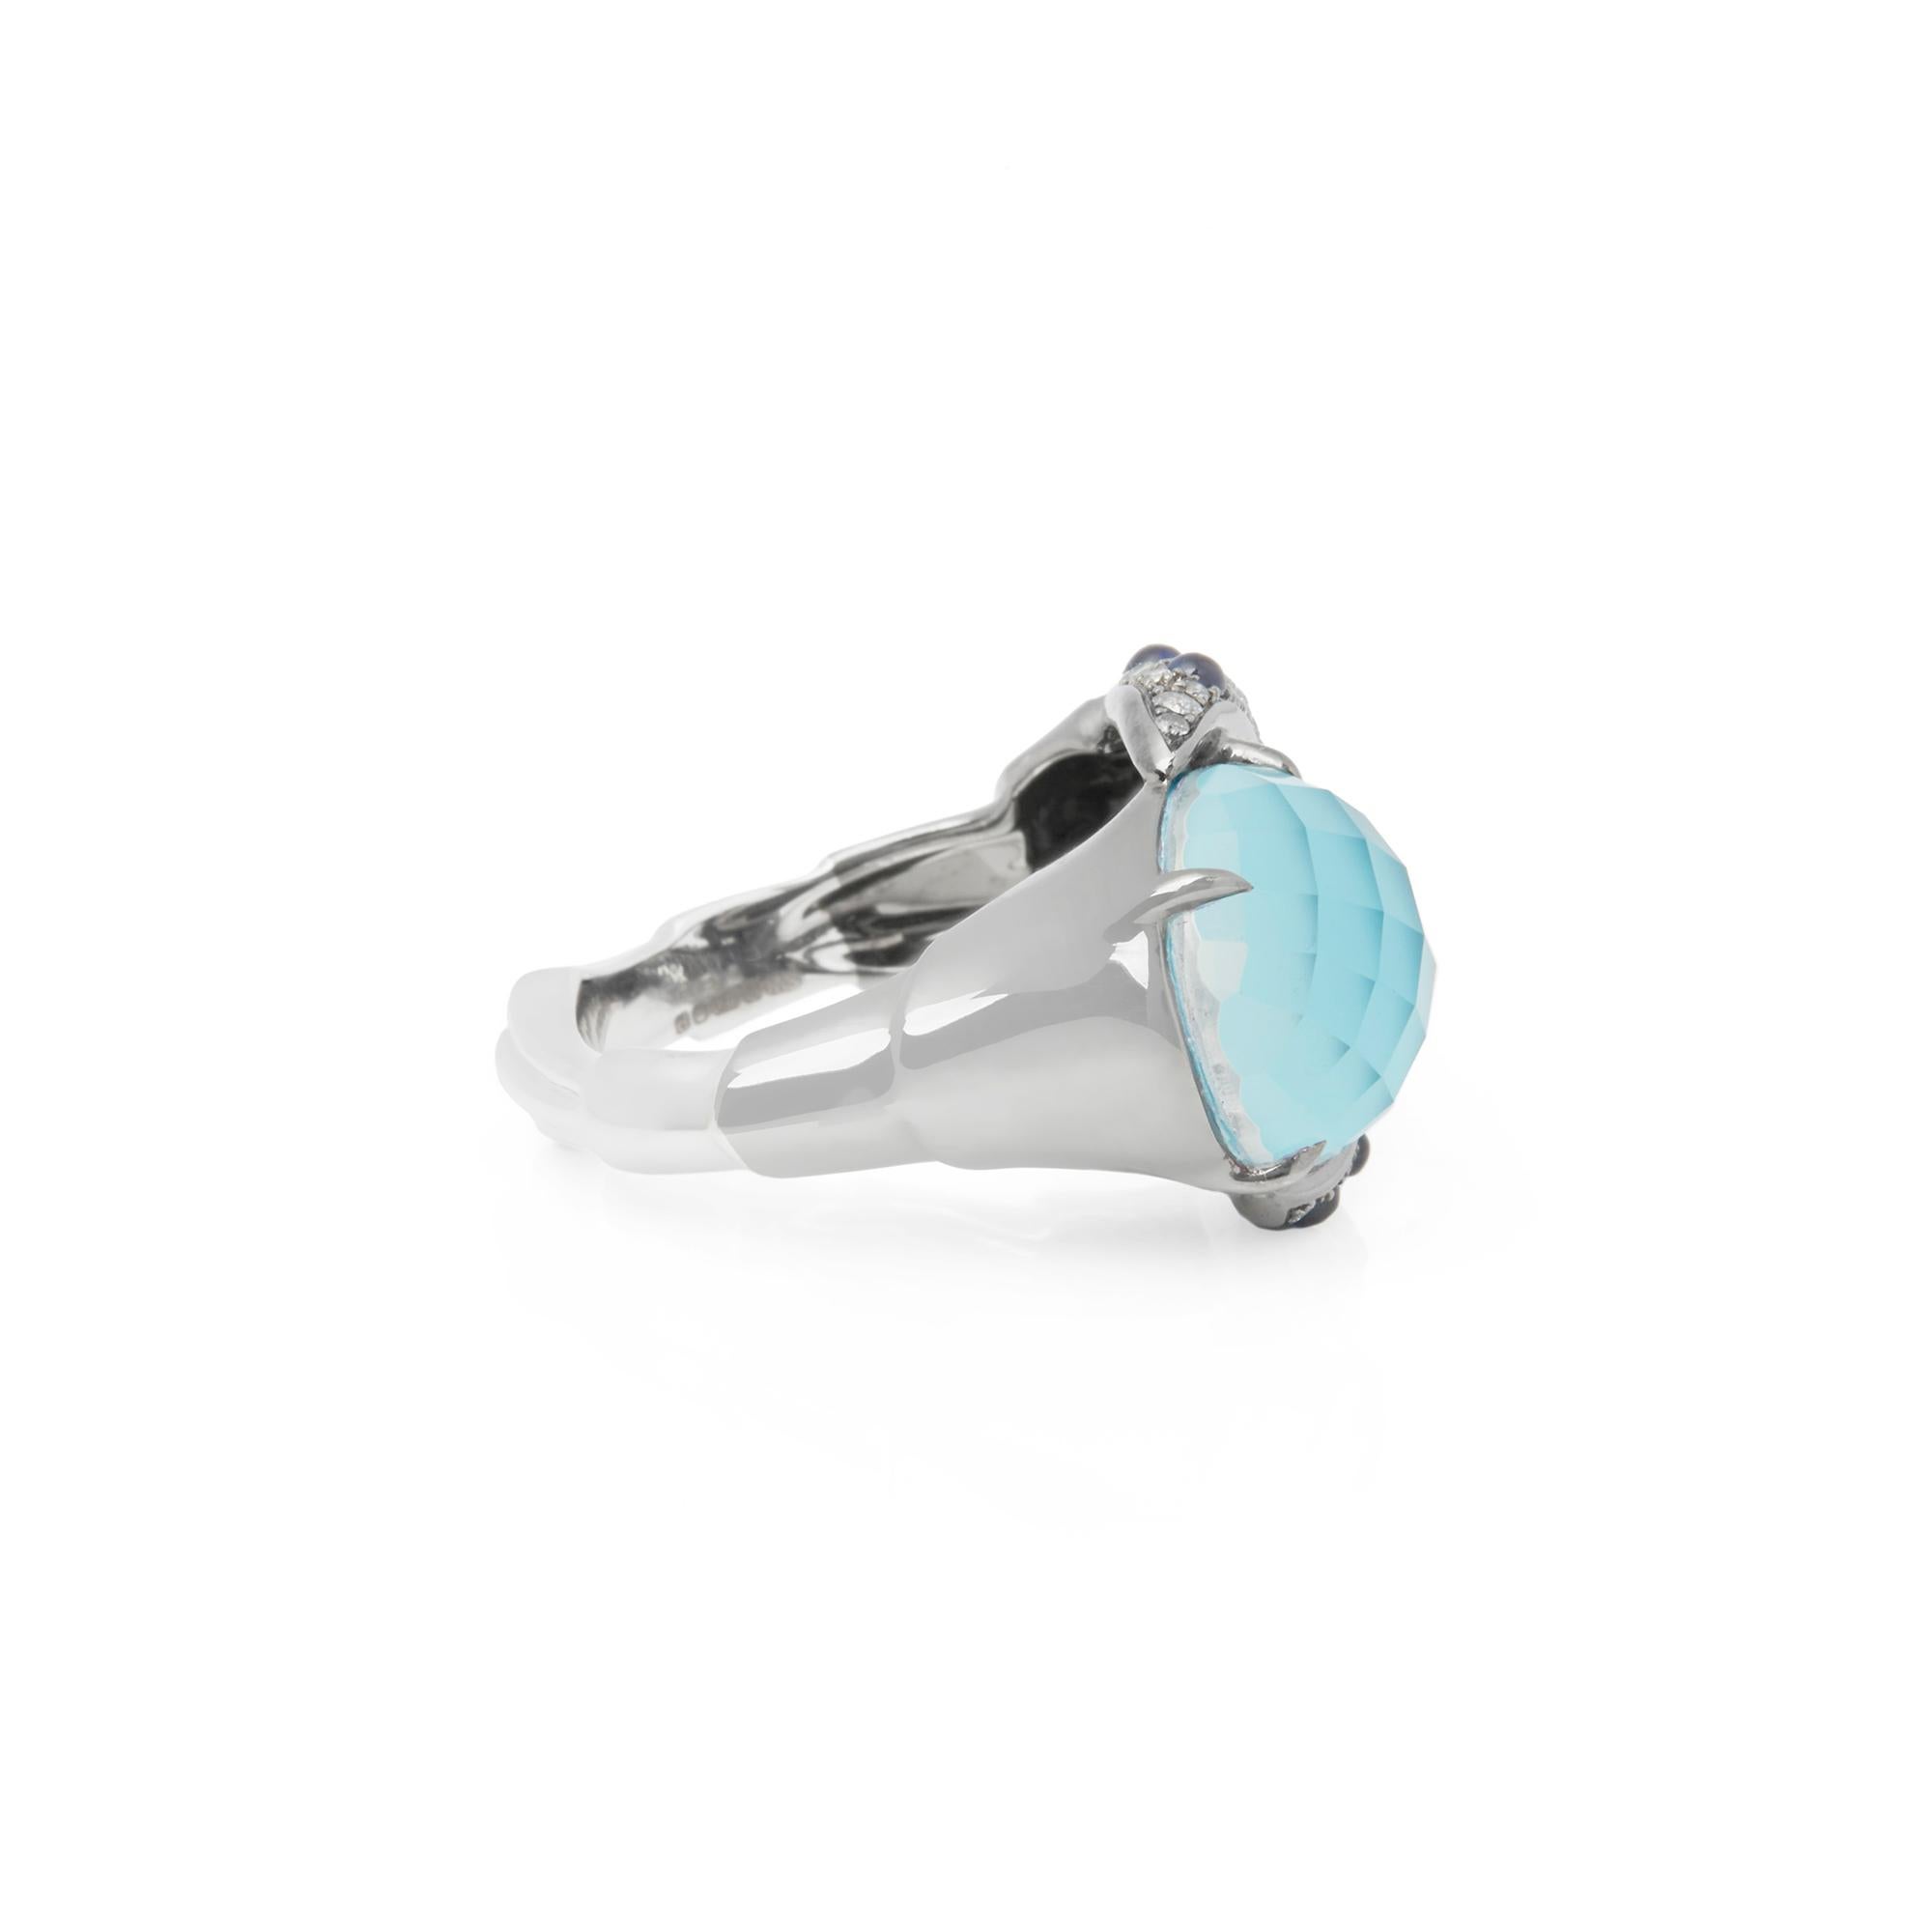 This Ring by Stephen Wenster is from his Jewels Verne Collection and features a faceted Turquoise Claw set surrounded by Pave set with Diamonds and Cabochon Sapphires Totalling 1.09cts. Set in 18k White Gold. UK ring size N1/2. 